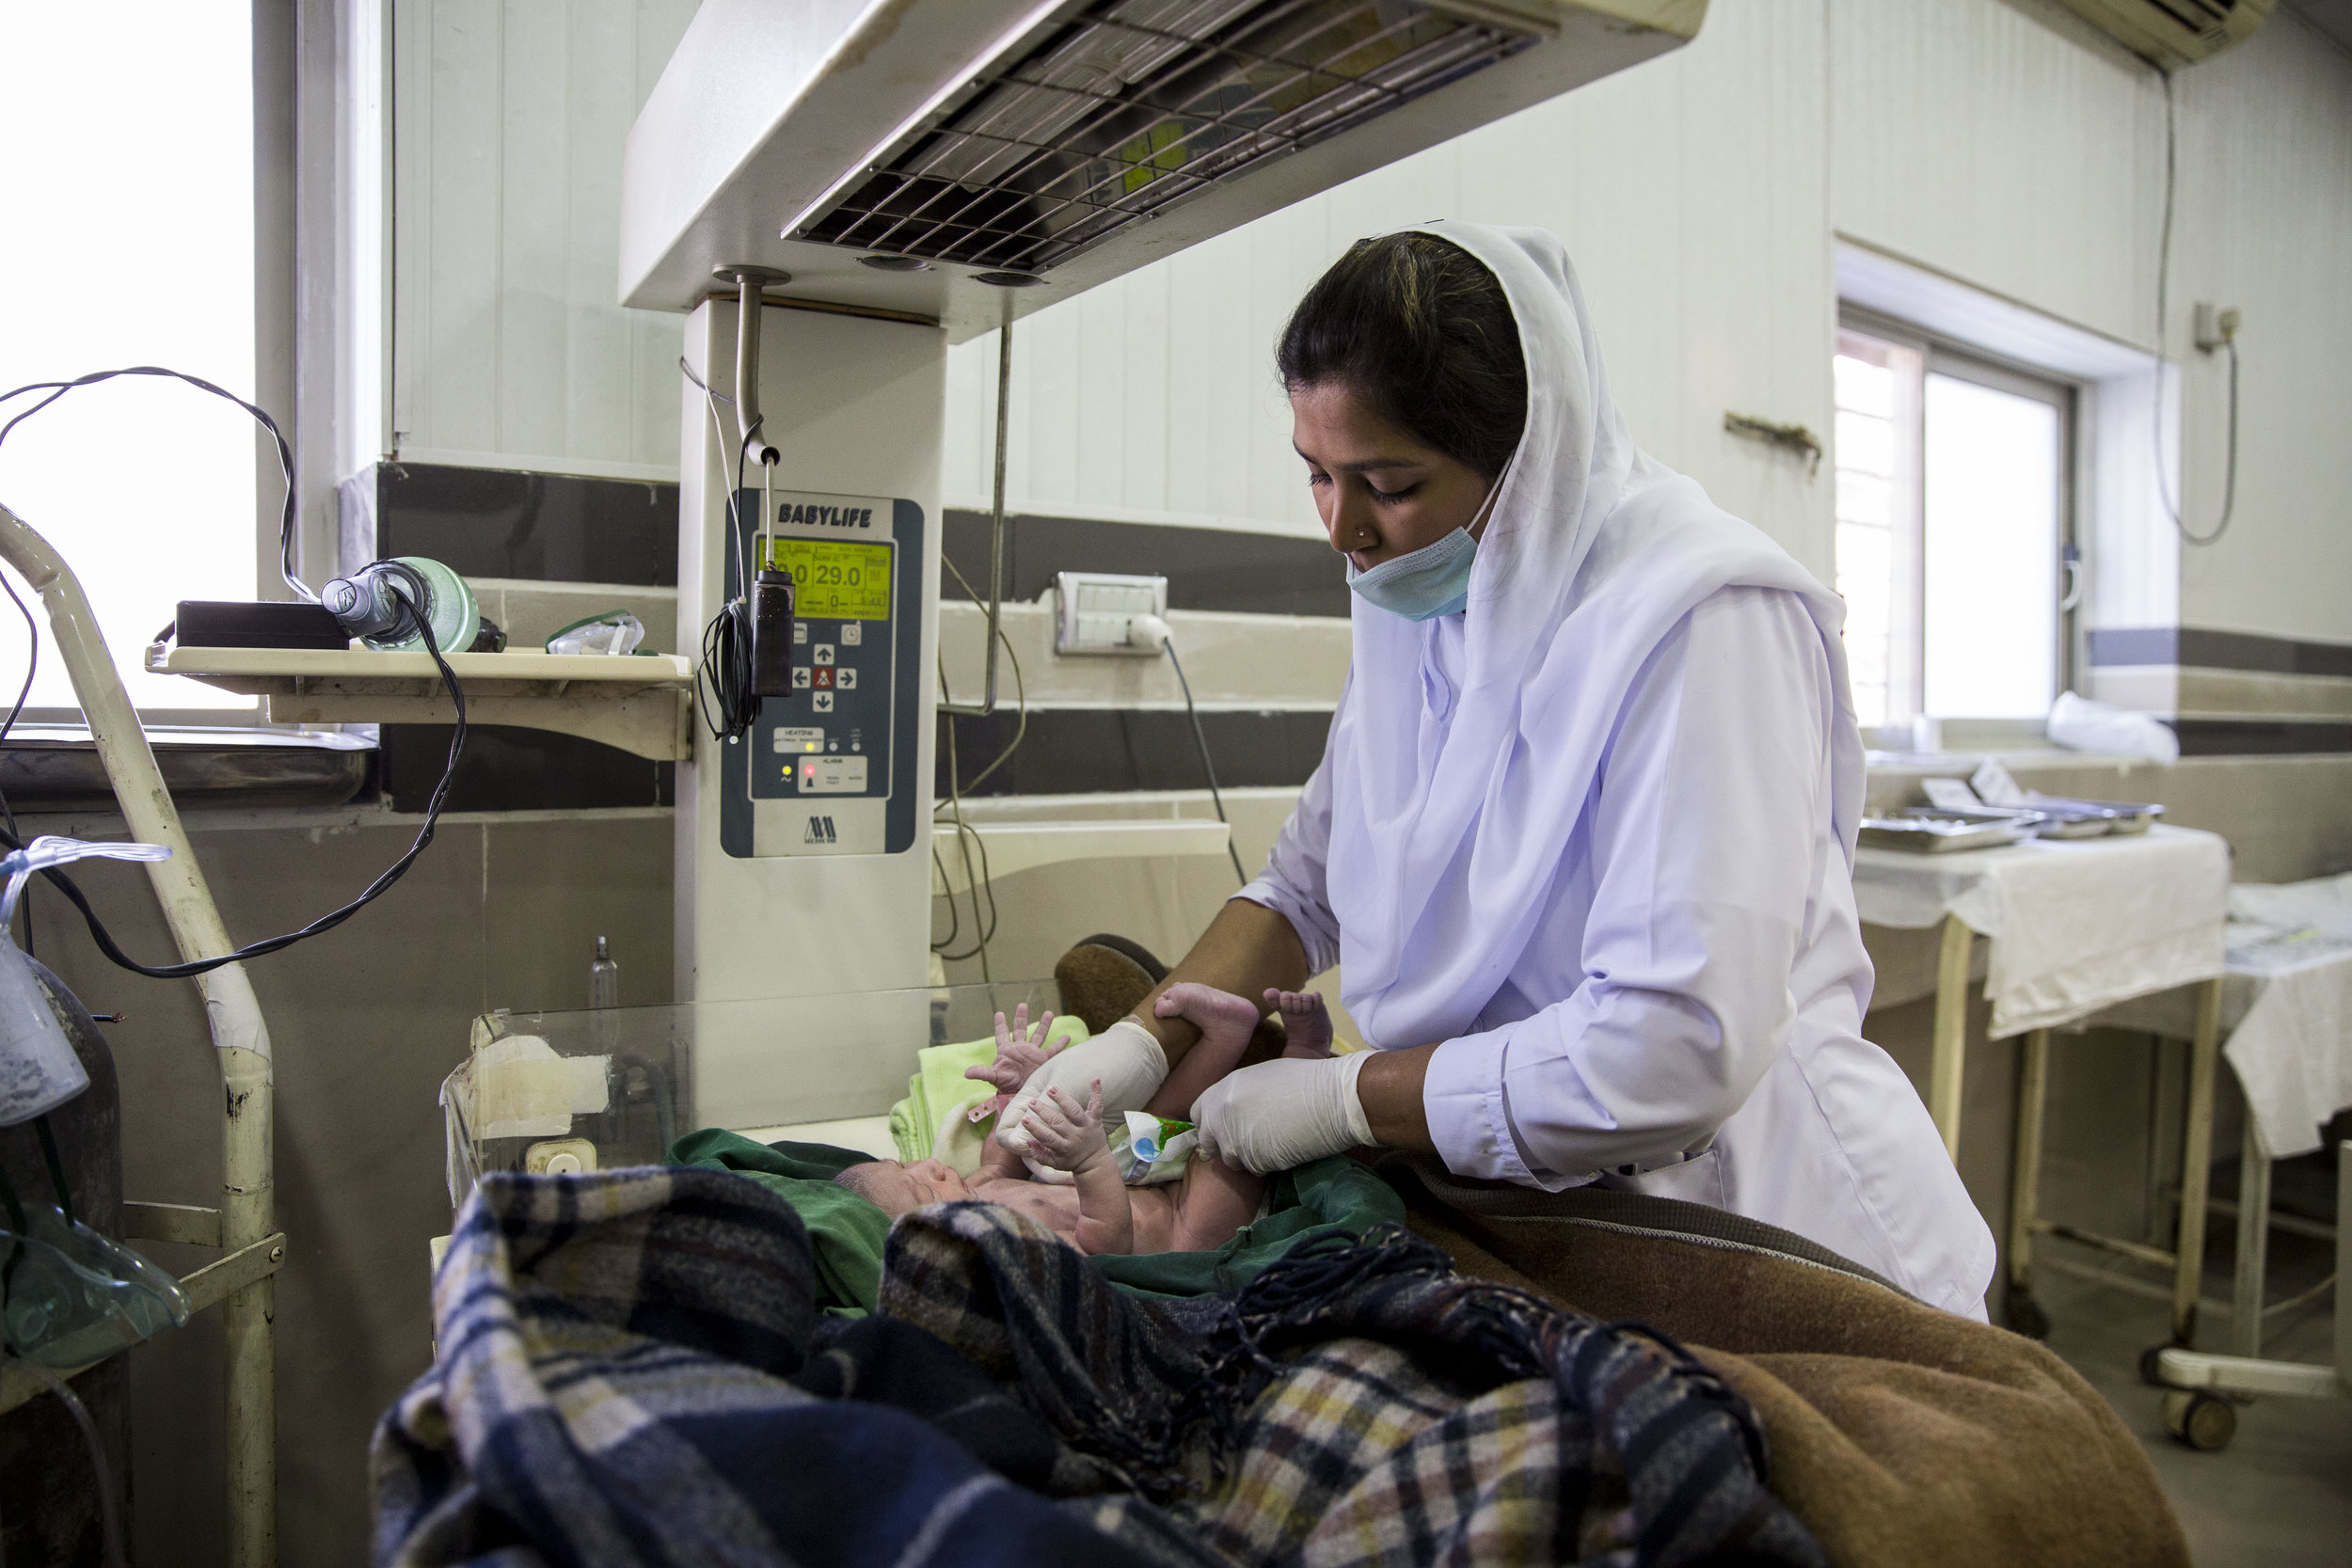  Staff Sehar Kanwal clothes a newborn baby inside the labour room. 